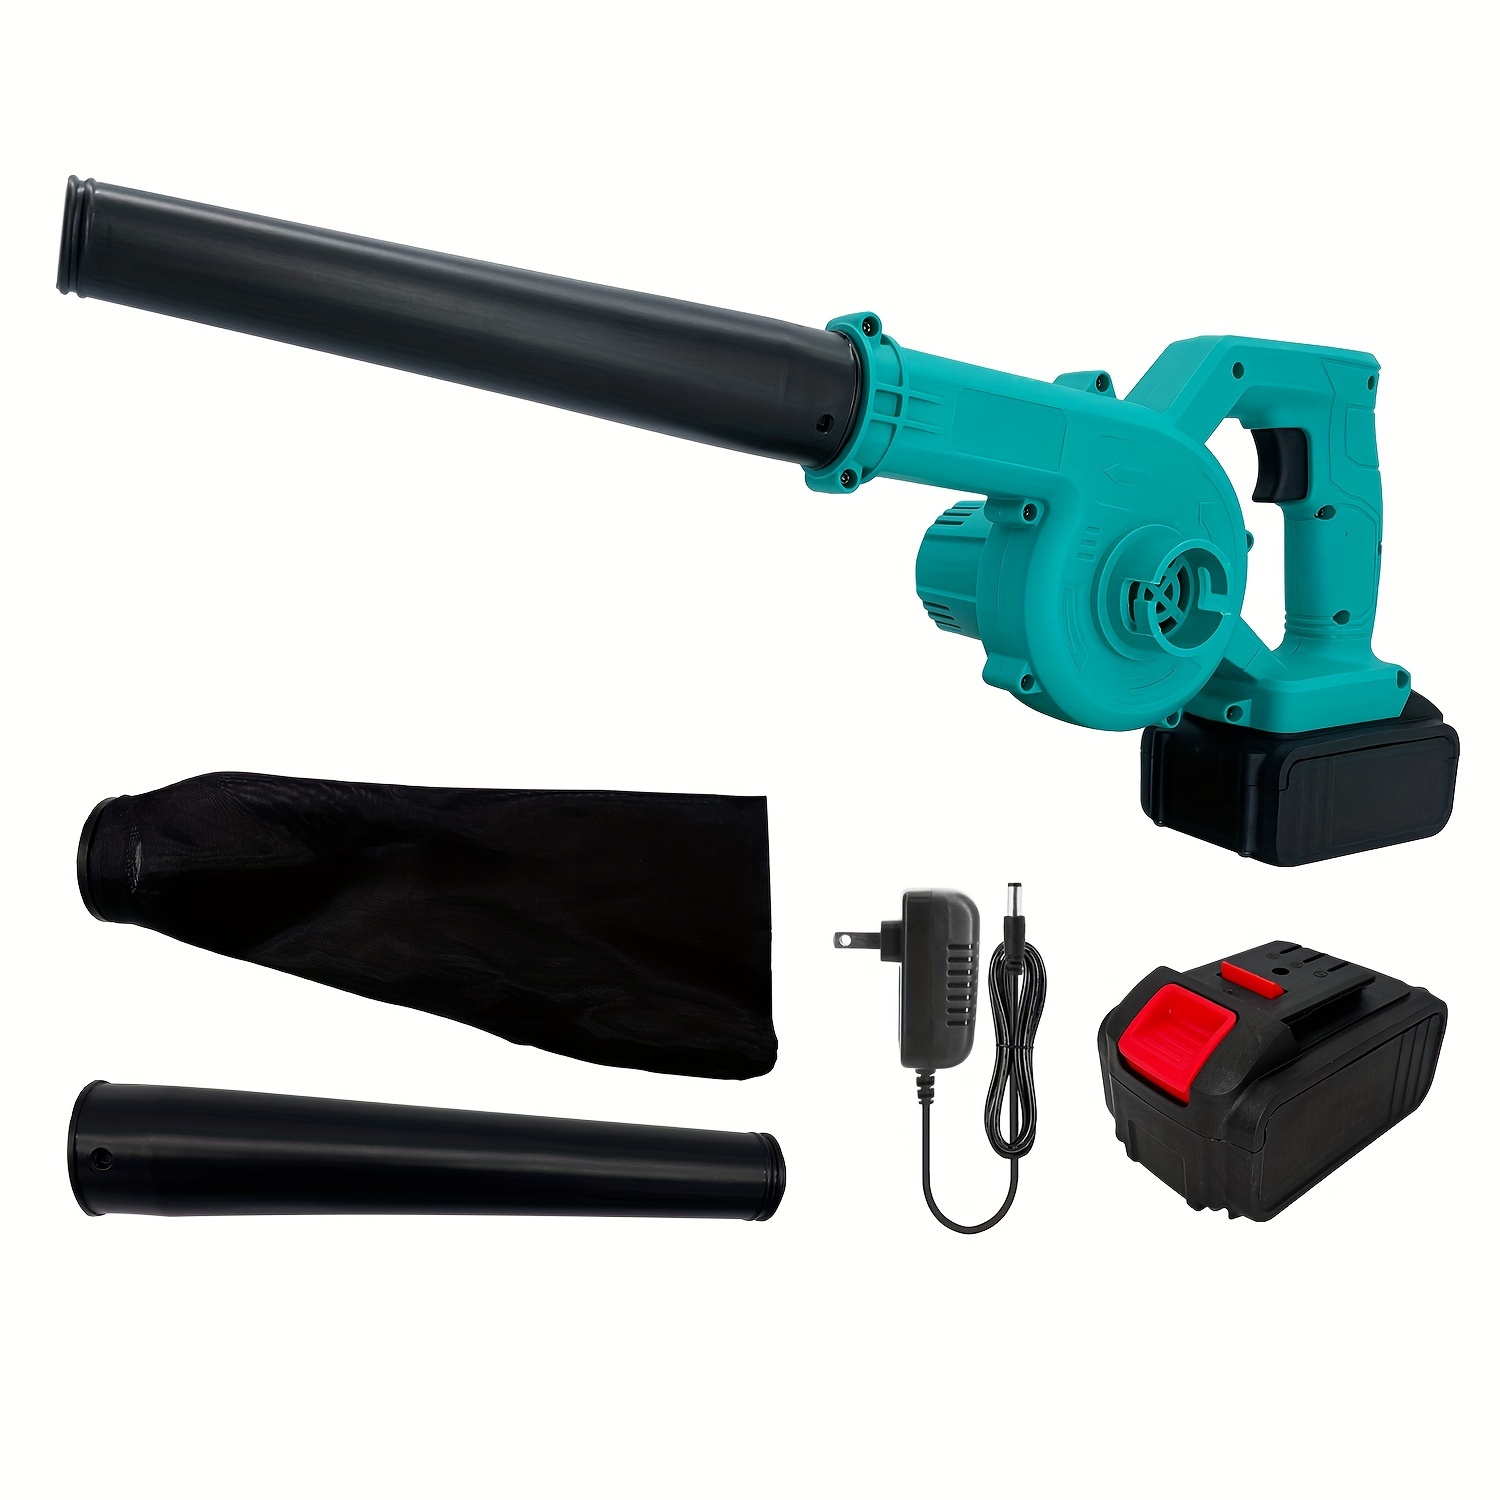 

Handheld Mini Electric Leaf Blower 48v Cordless Li-ion Battery Vacuum Leaf Blower For Lawn Care, Yards, Patios And Garages